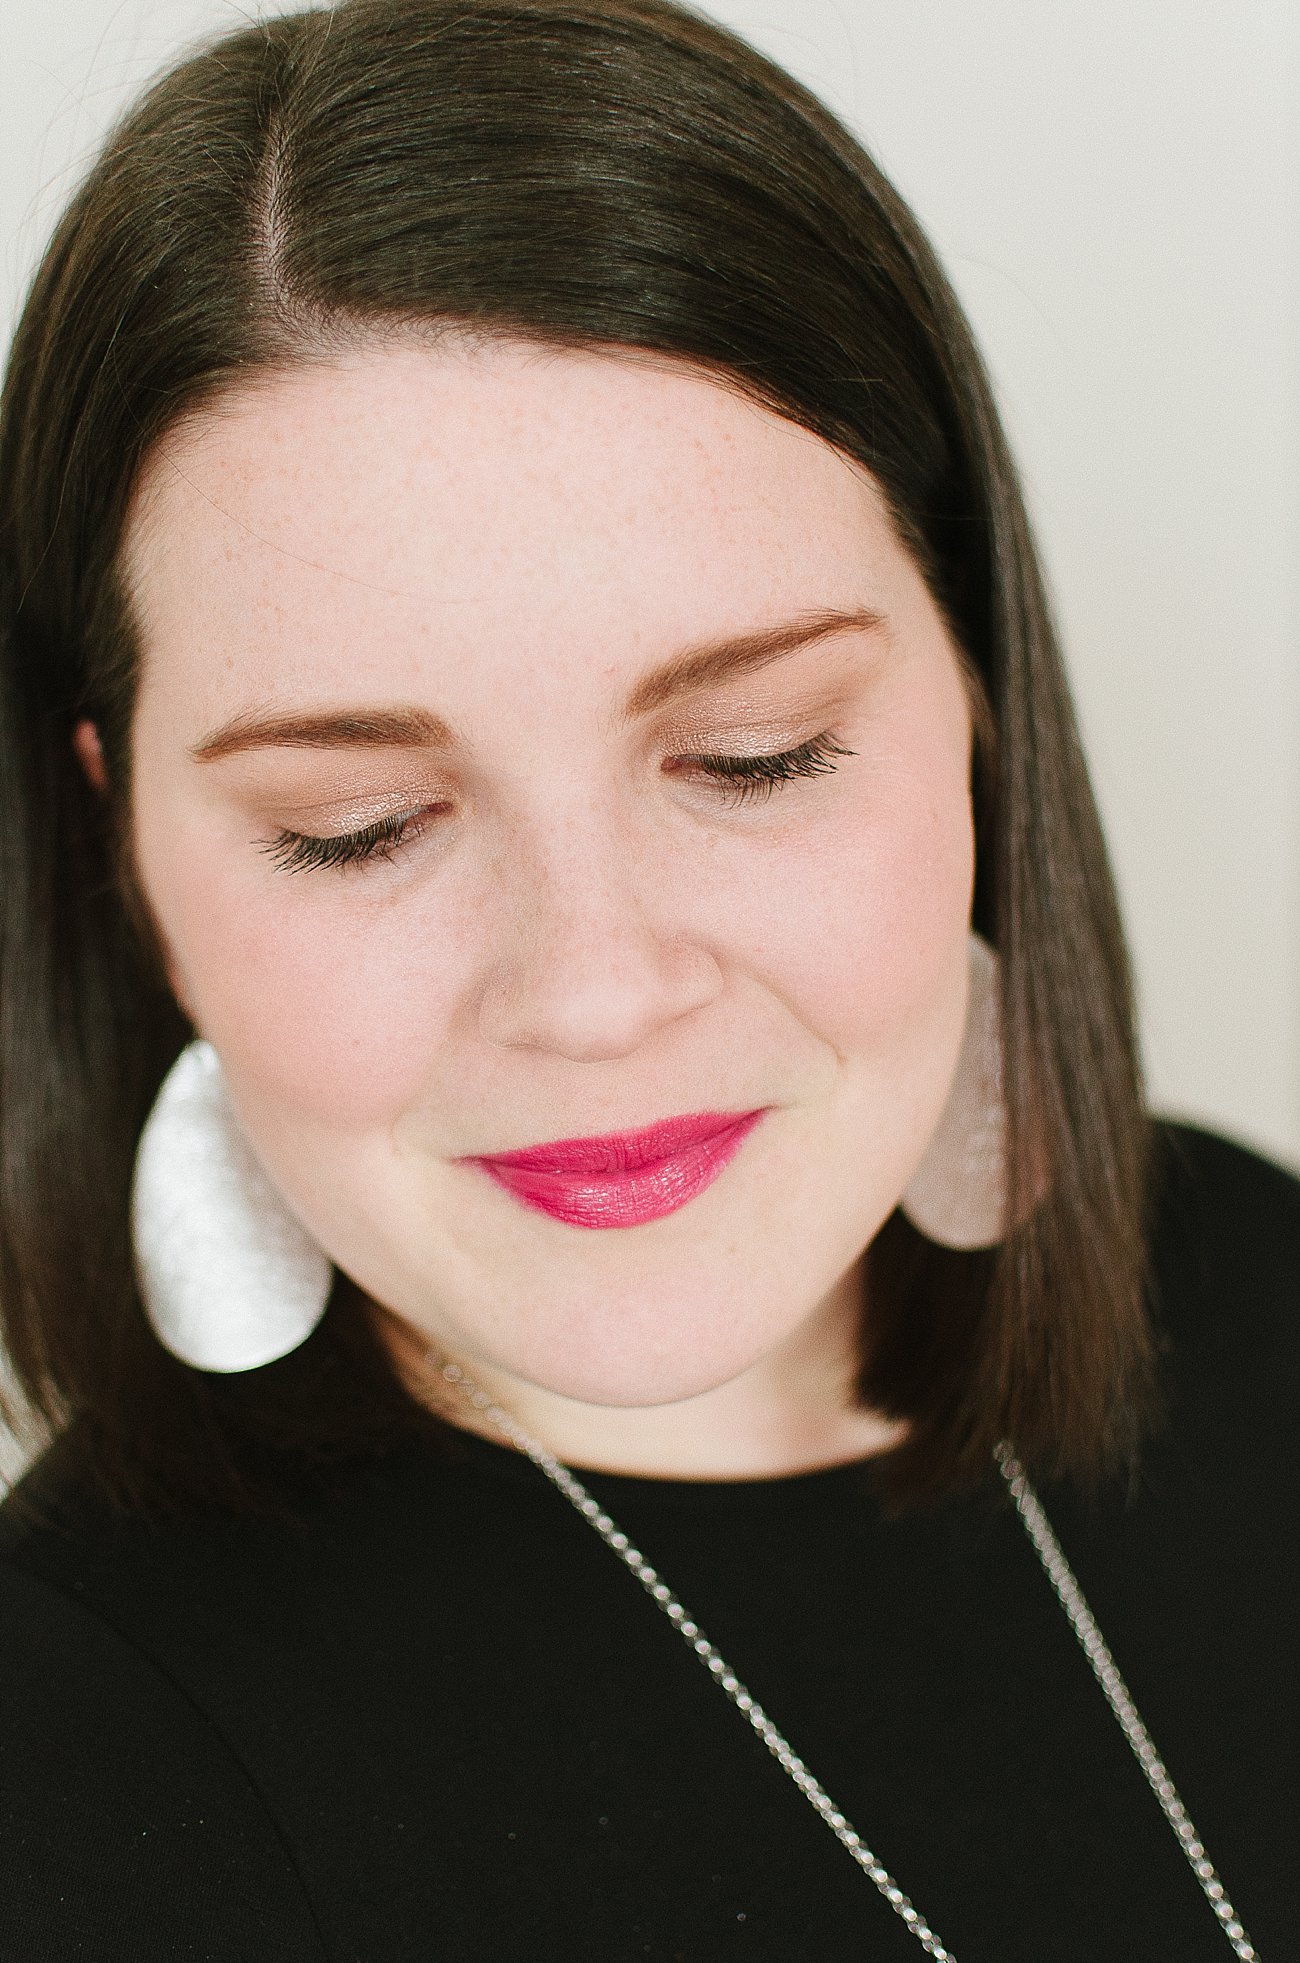 100% Pure Cosmetics Review & Everyday Makeup Tutorial by lifestyle blogger Still Being Molly